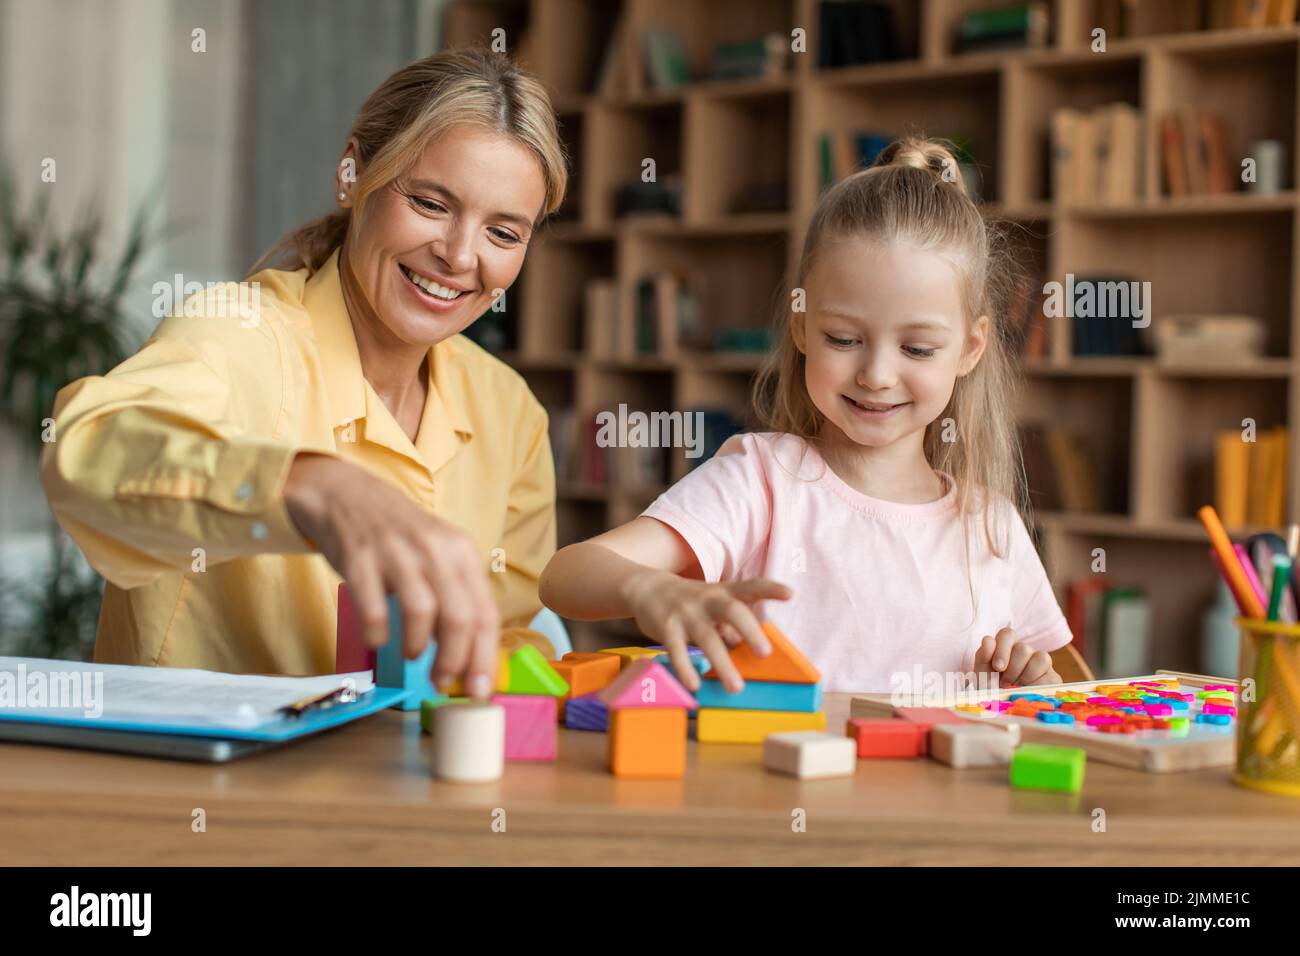 Games and education concept. Positive female teacher exercising with smart girl, playing wooden development blocks Stock Photo